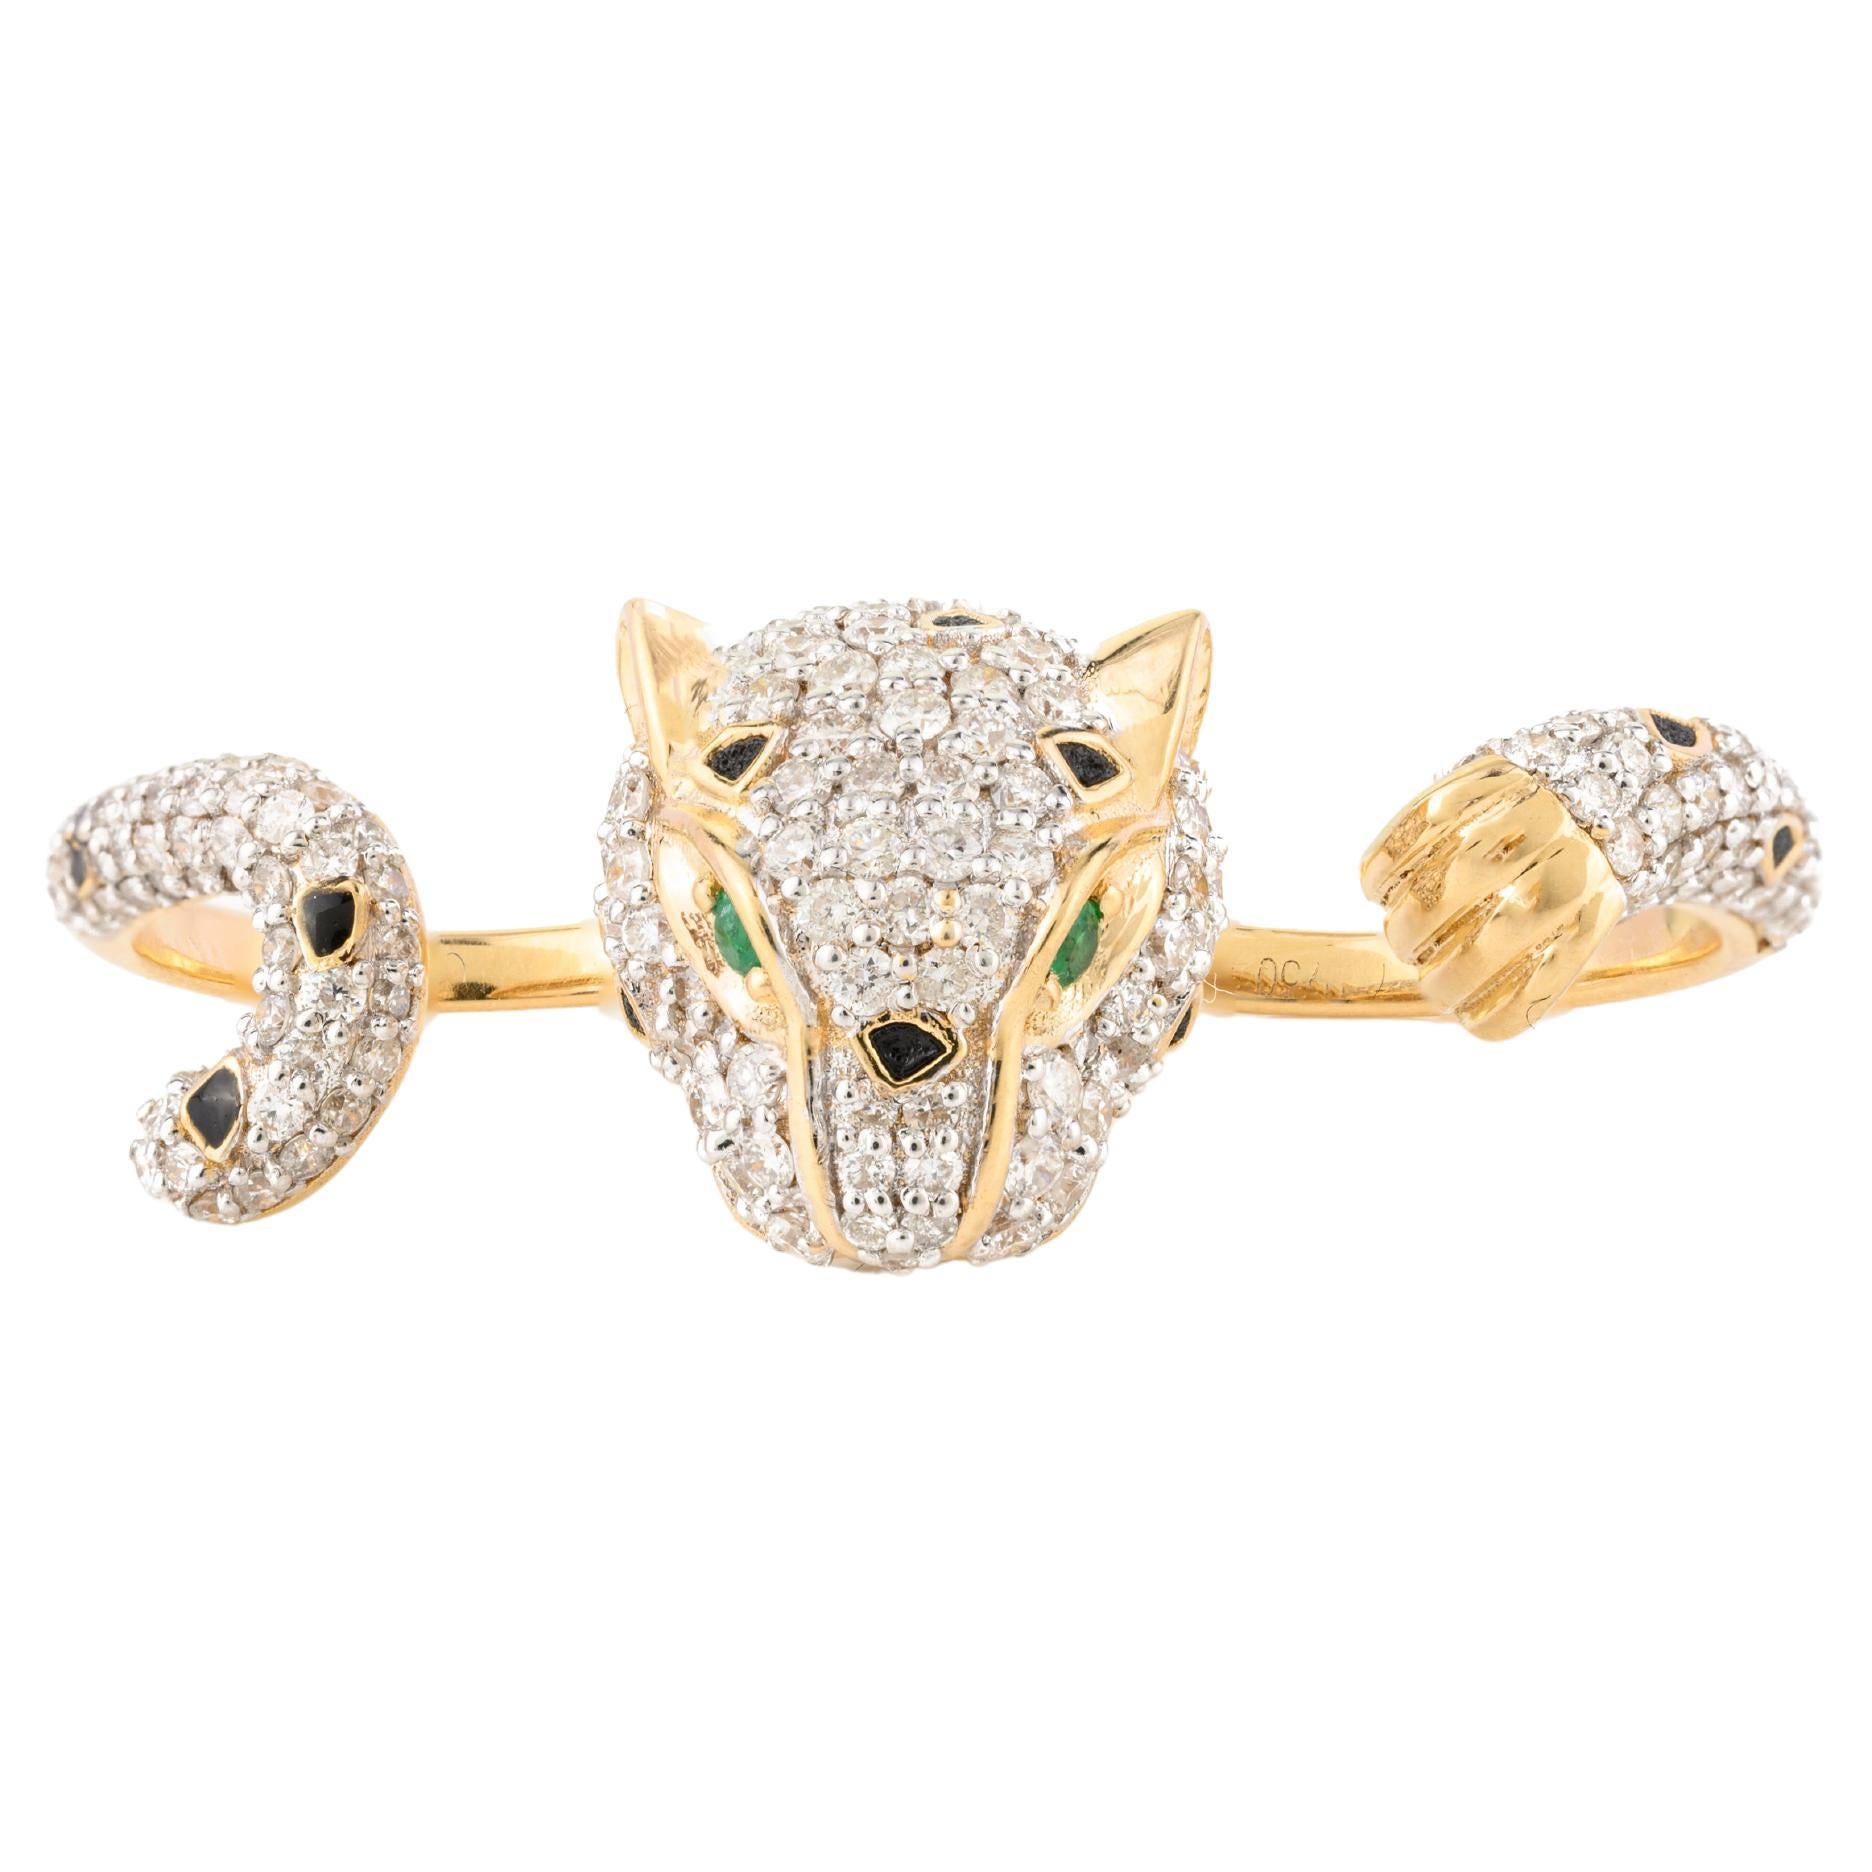 For Sale:  Statement 2.06 Carat Diamond Panther Double Finger Ring in 18k Yellow Gold